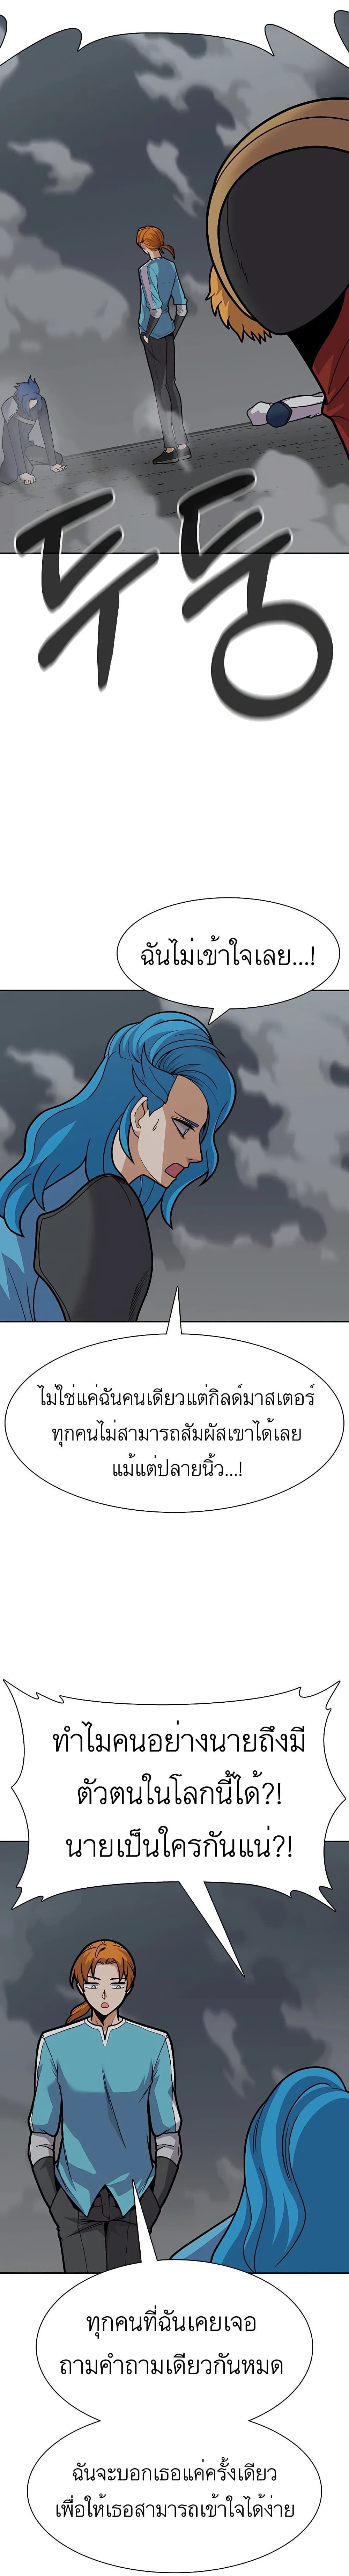 Raising Newbie Heroes In Another World ตอนที่ 19 (10)